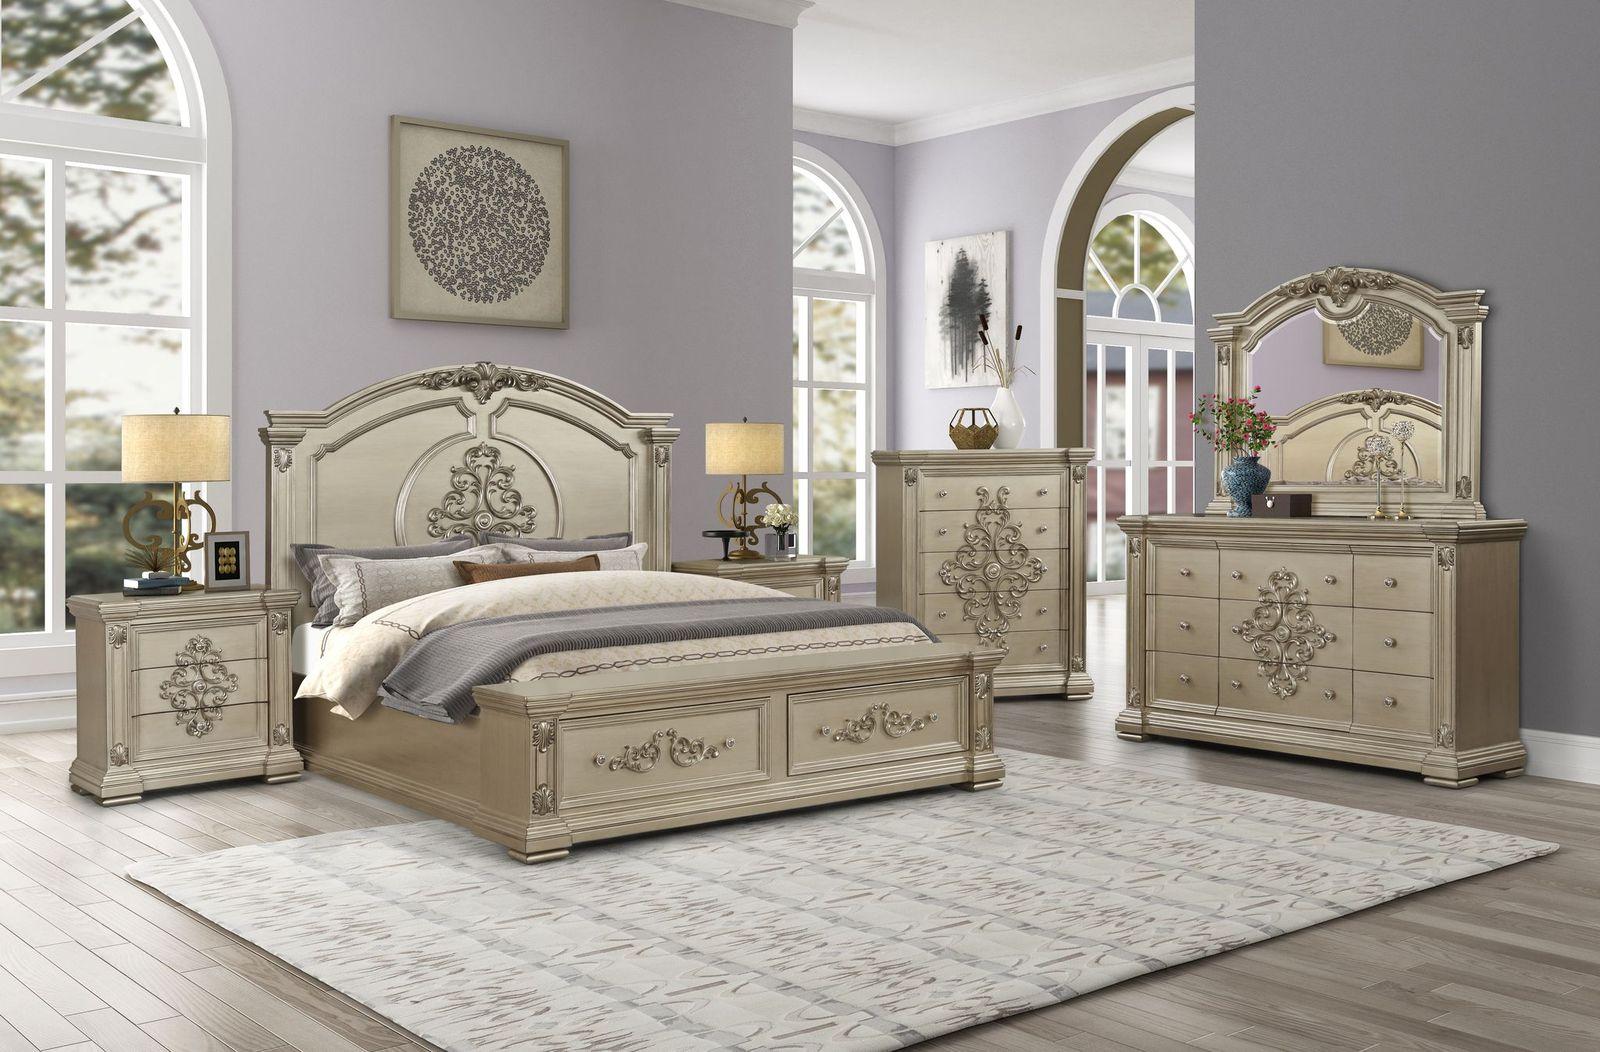 

    
Metallic beige finished Queen Bedroom Set 5Pcs Transitional Cosmos Furniture Alicia
